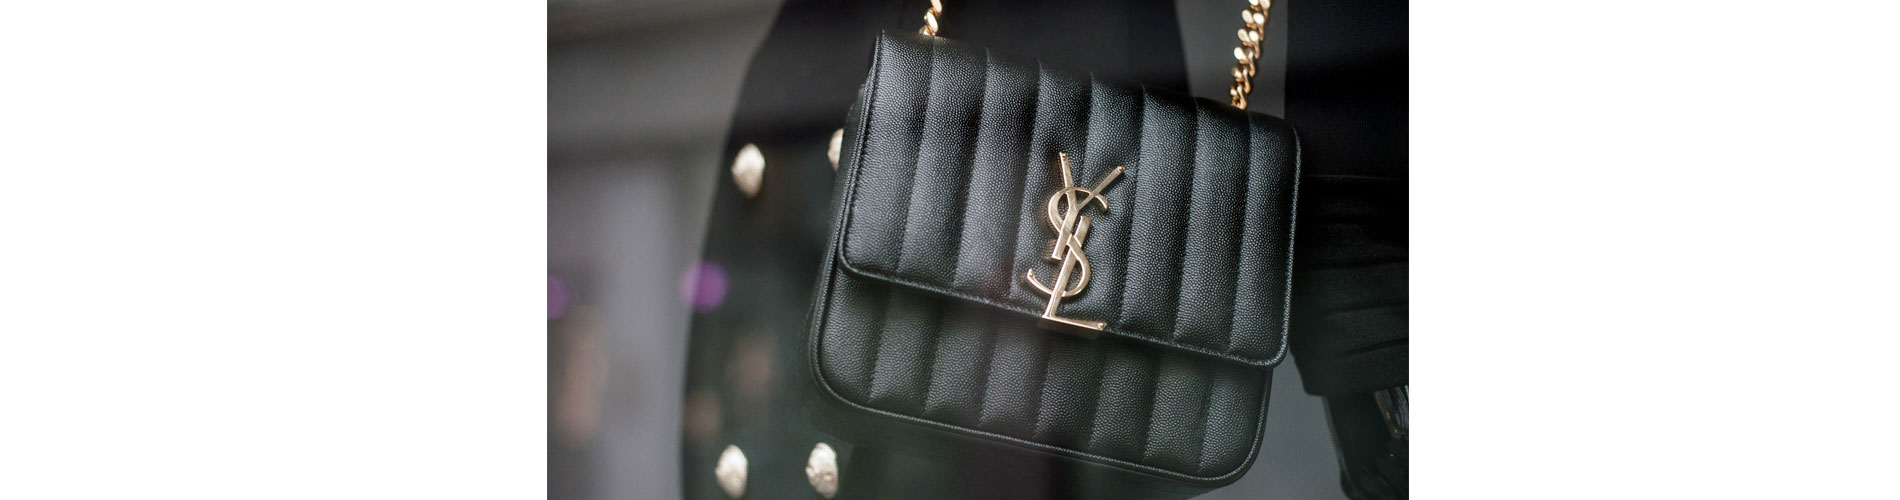 Yves Saint Laurent Bag  Buy or Sell your YSL Bags for women